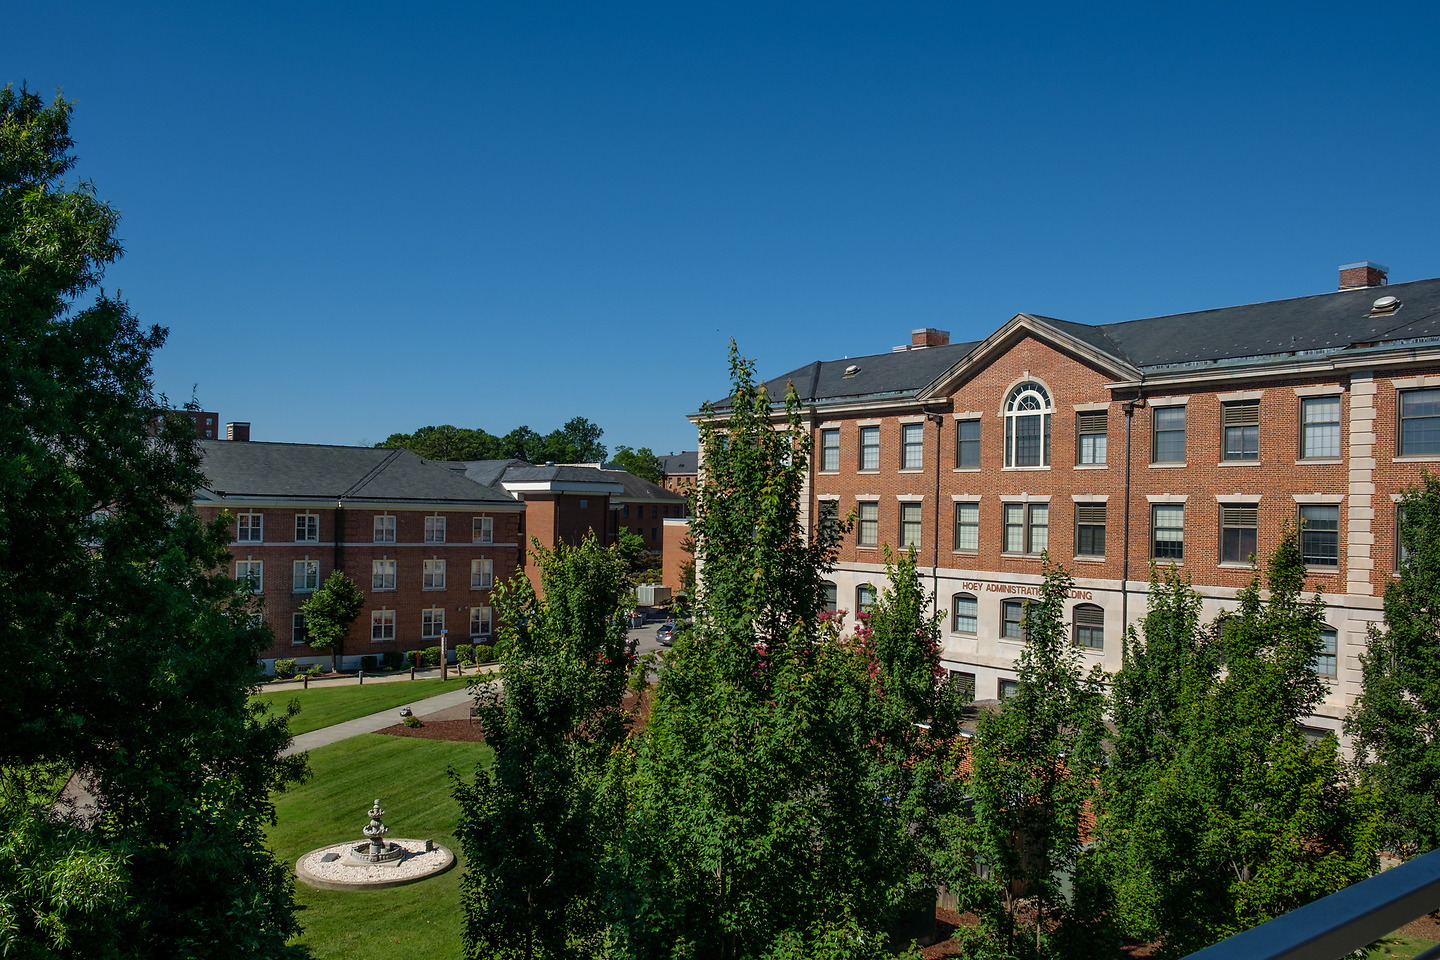 Overhead view of the NCCU campus.